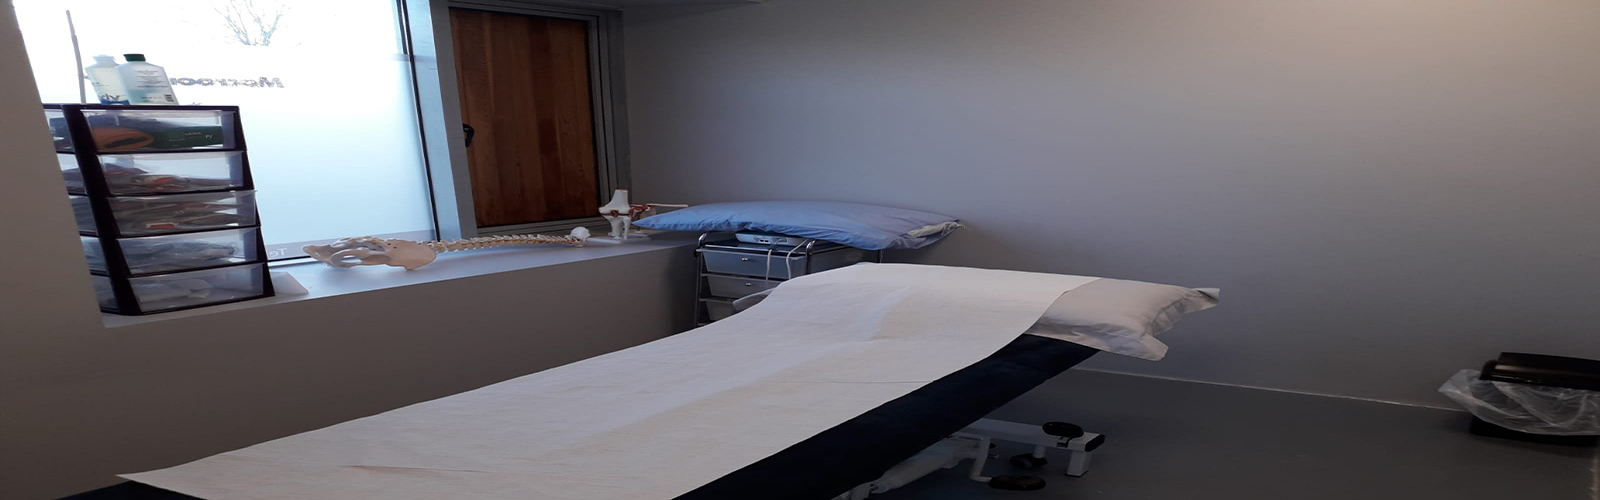 We offer highly
specialized treatments